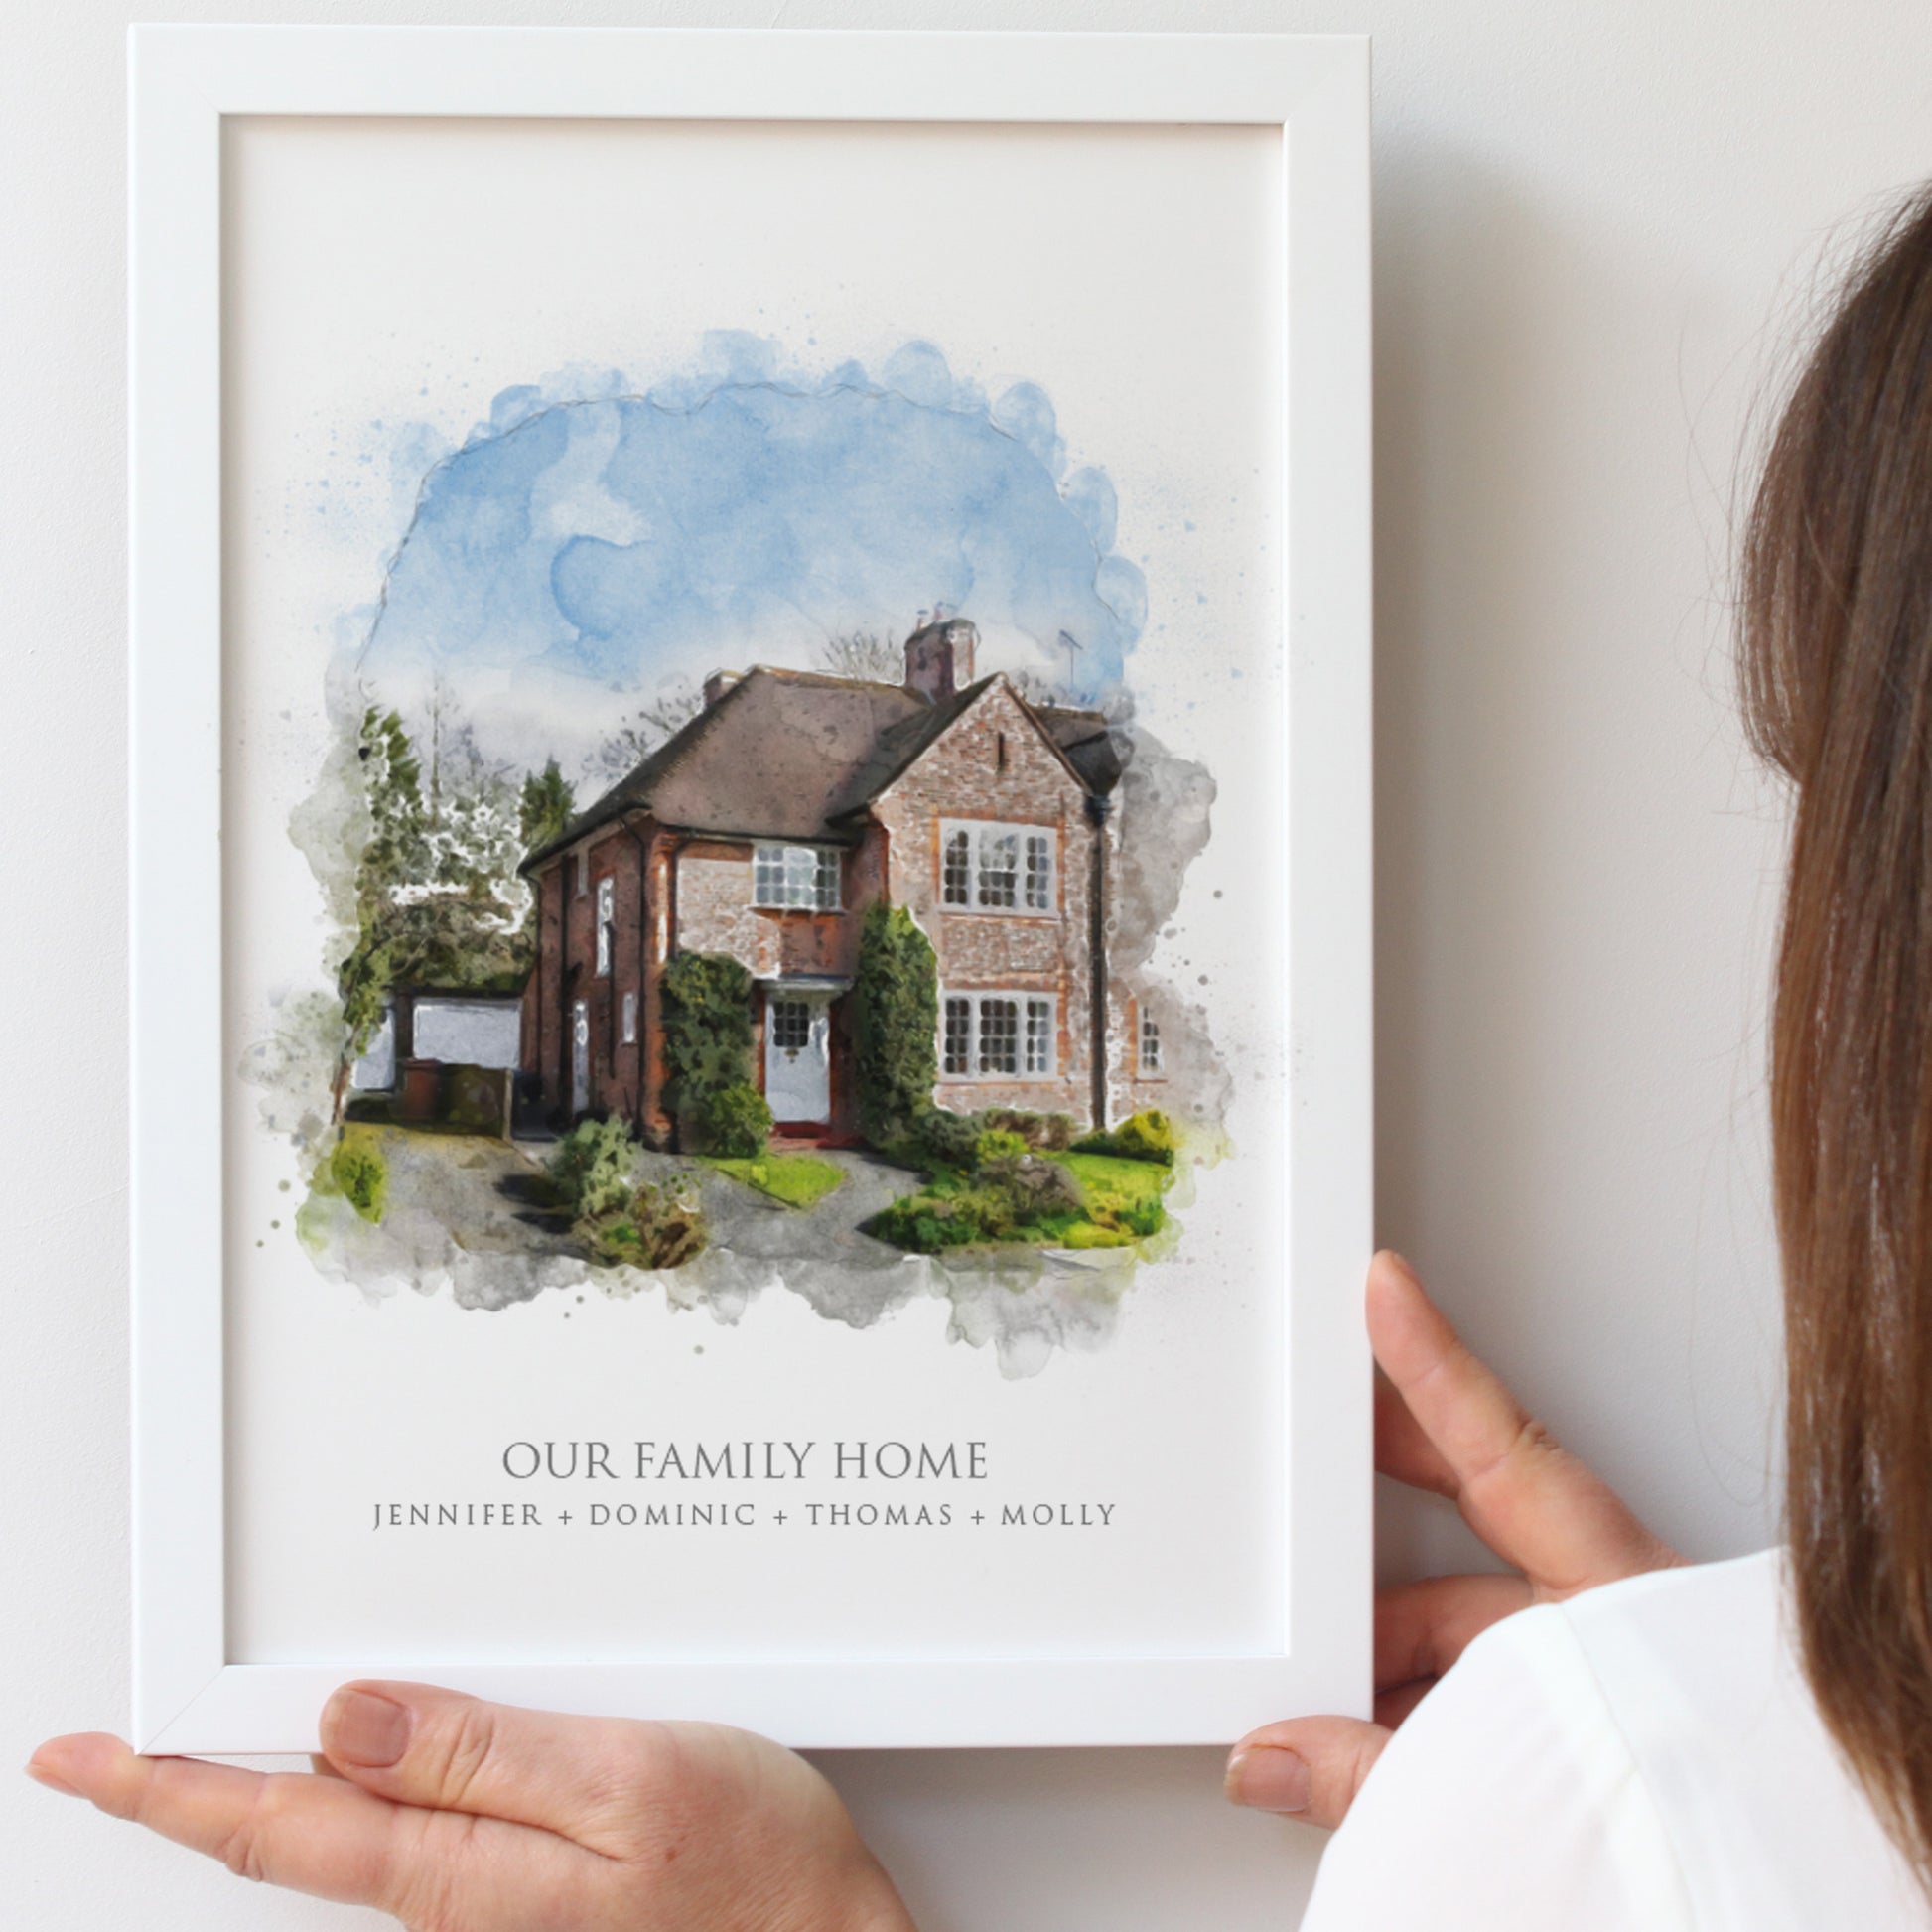 illustration of a flint family home in a white A4 portrait frame